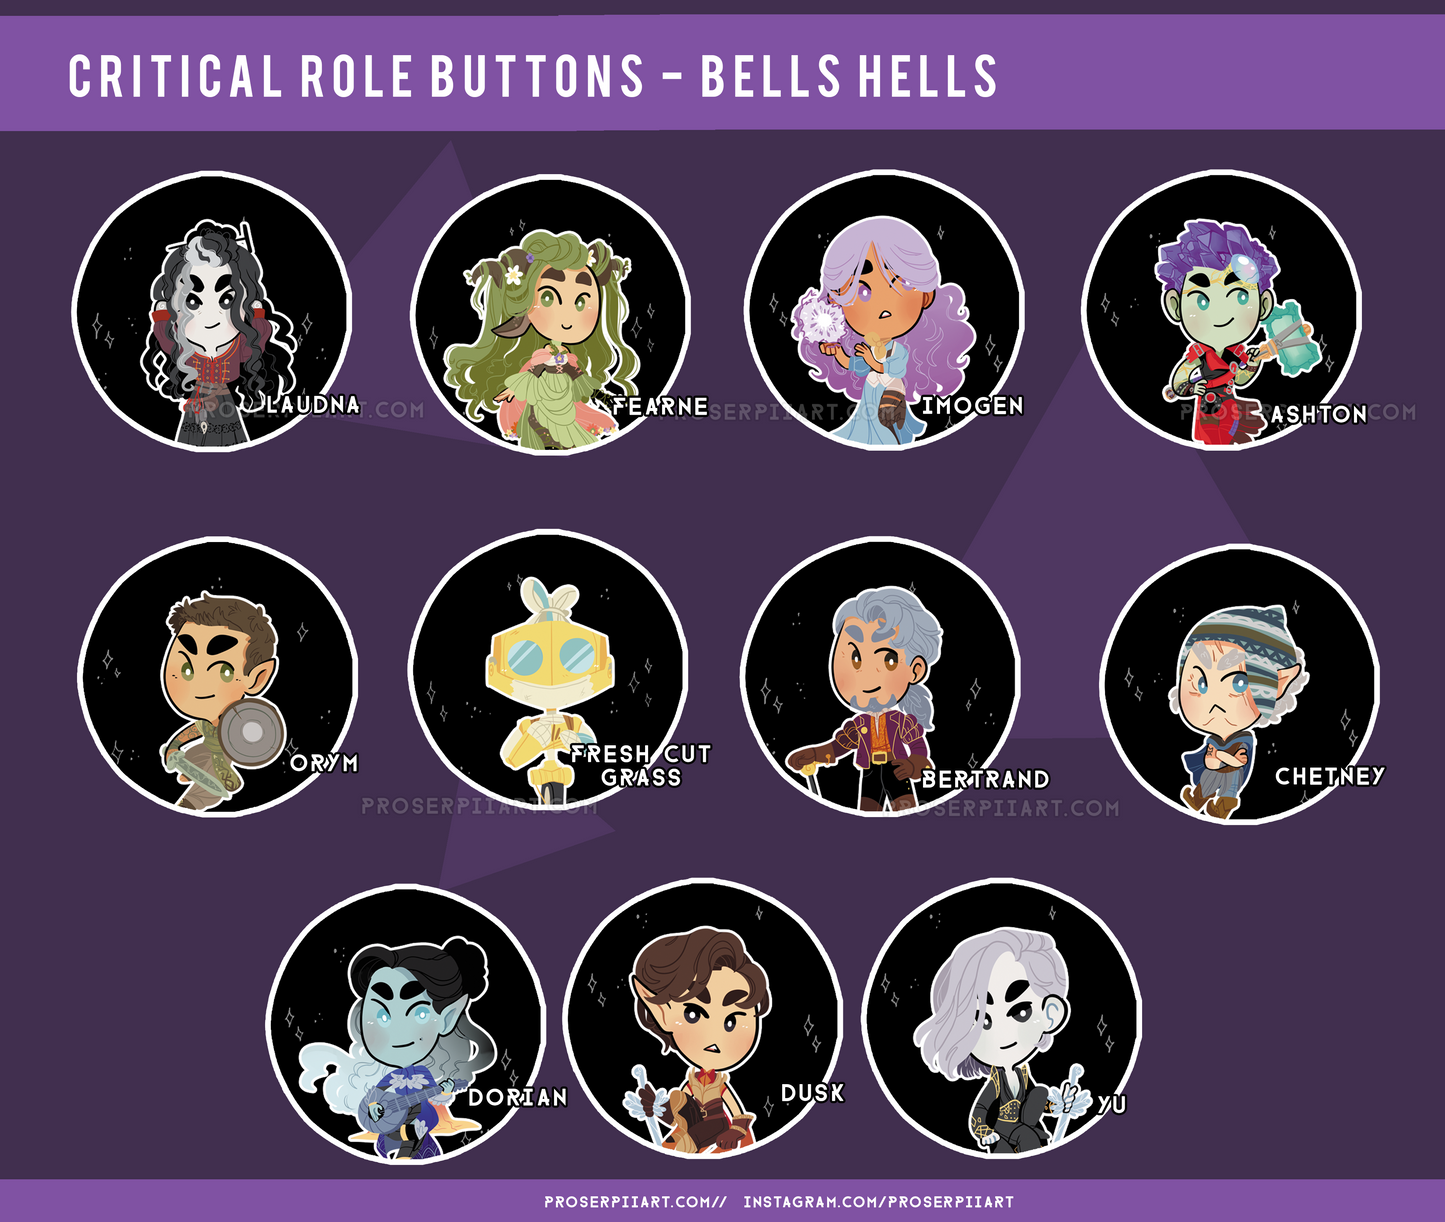 Critical Role Buttons - Mighty Nein and Bells Hells